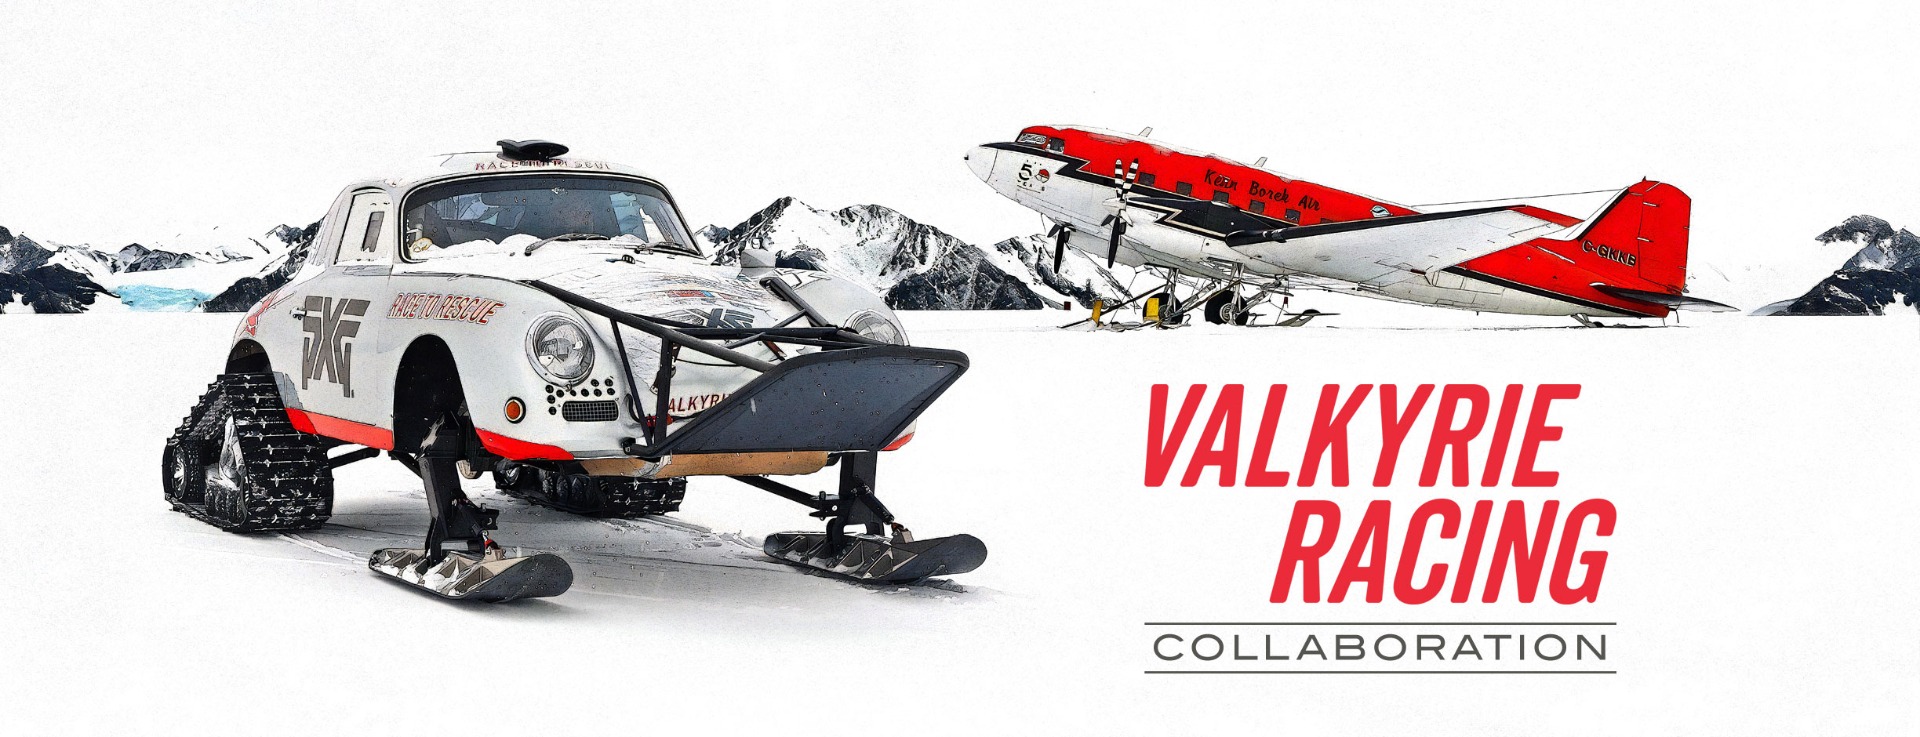 Valkyrie Racing collaboration page